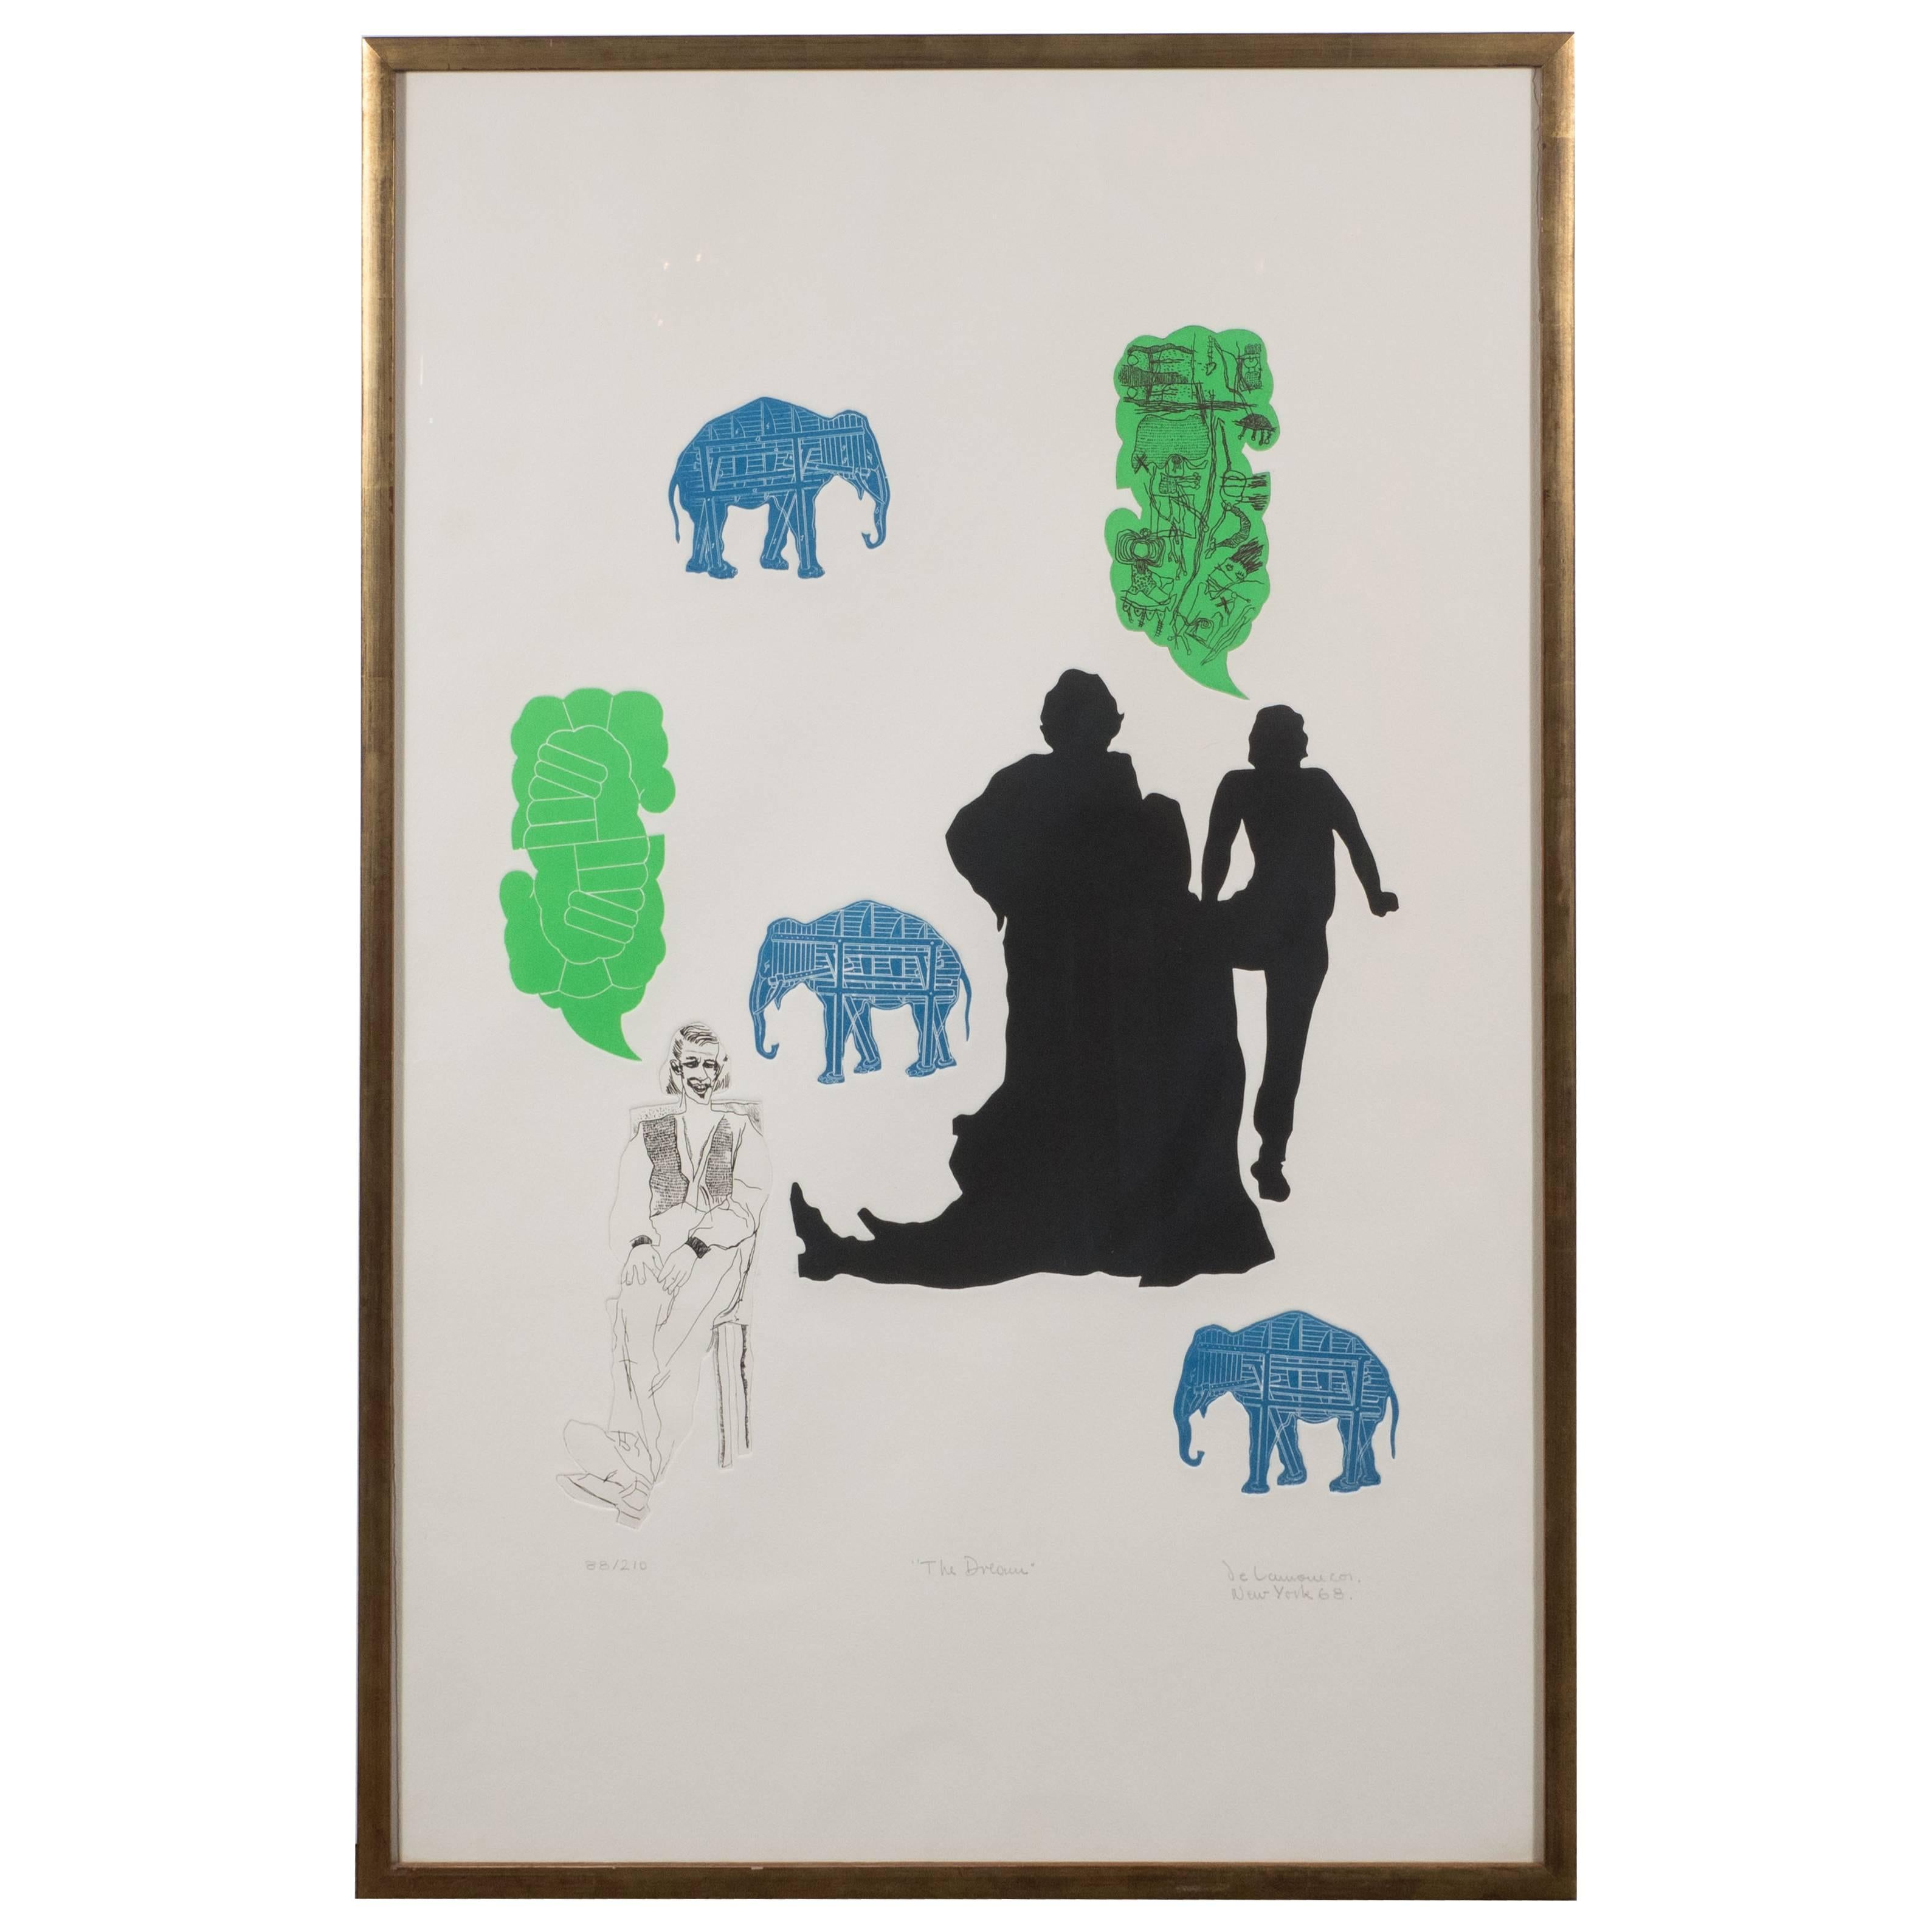 "The Dream" Lithograph Printed in Colors, Depicting Jungle Scenes, 1968